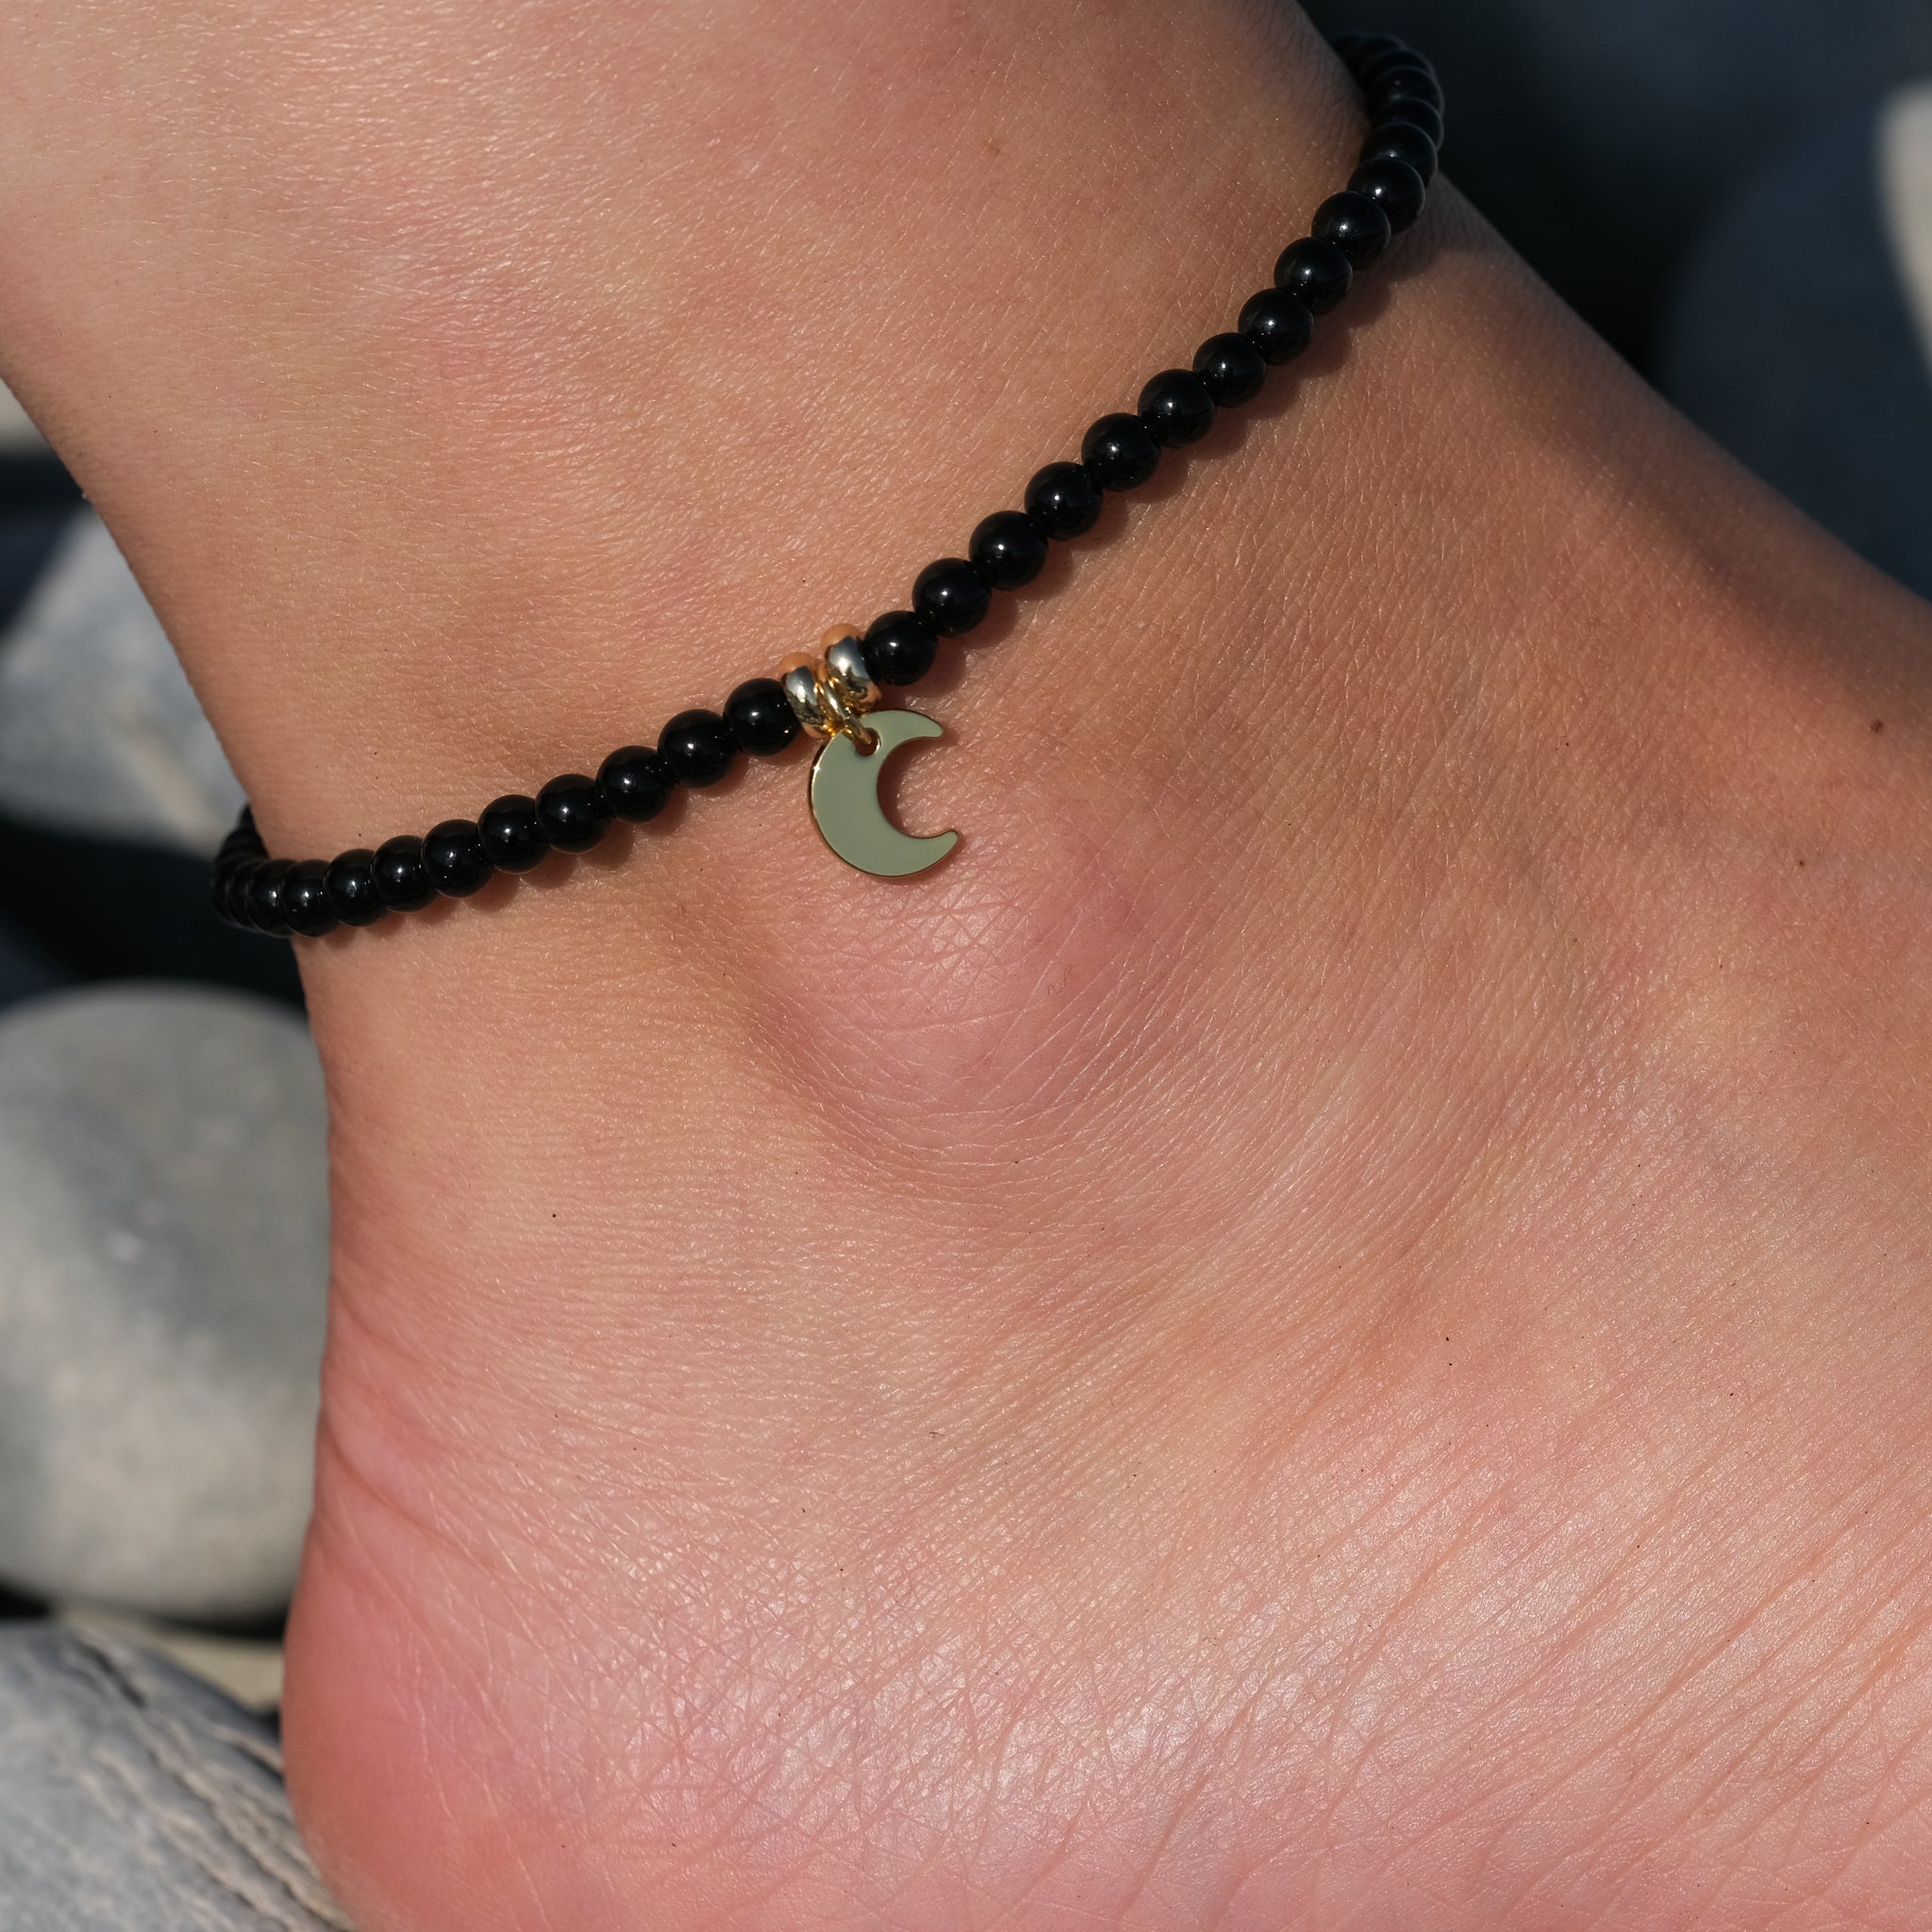 Black onyx crystal anklet with 18ct gold plated moon charm